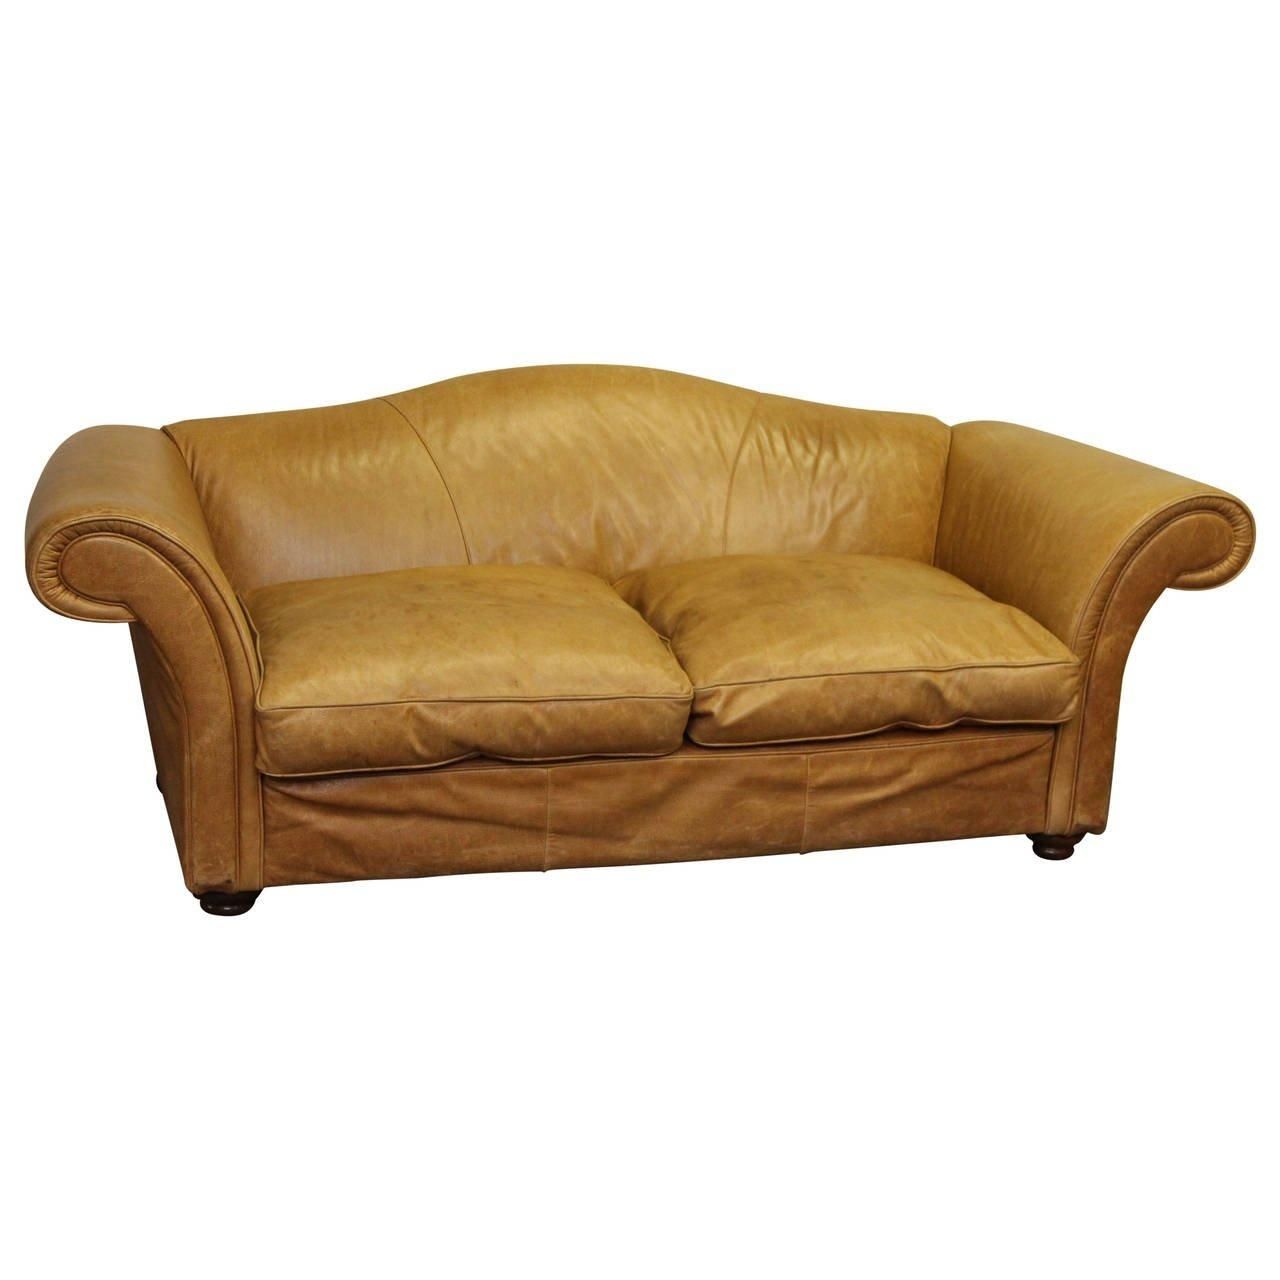 1950s Oversized French Leather Sofa With Down Filled Cushions For Inside Sofa Cushions (Photo 11 of 21)